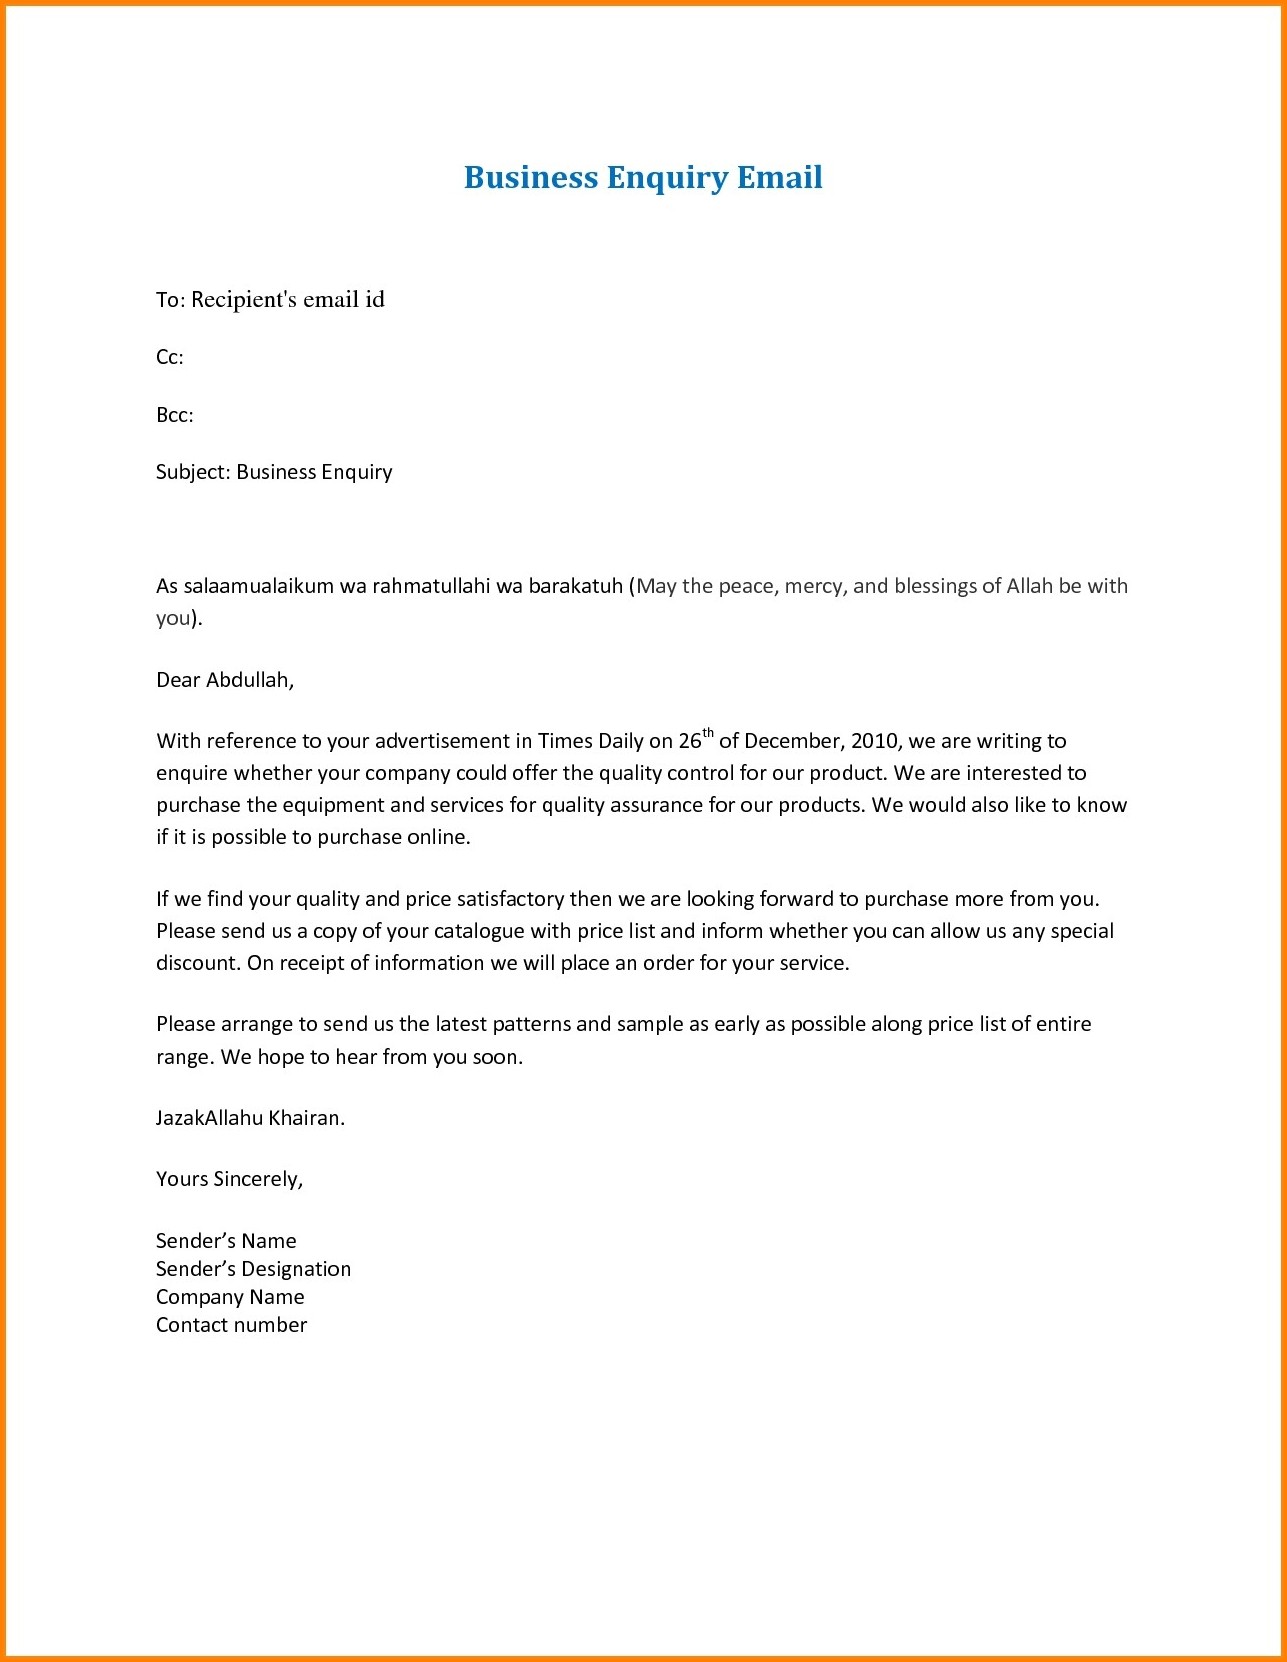 Business Email Format Sample Fresh Business Email Format The Free 